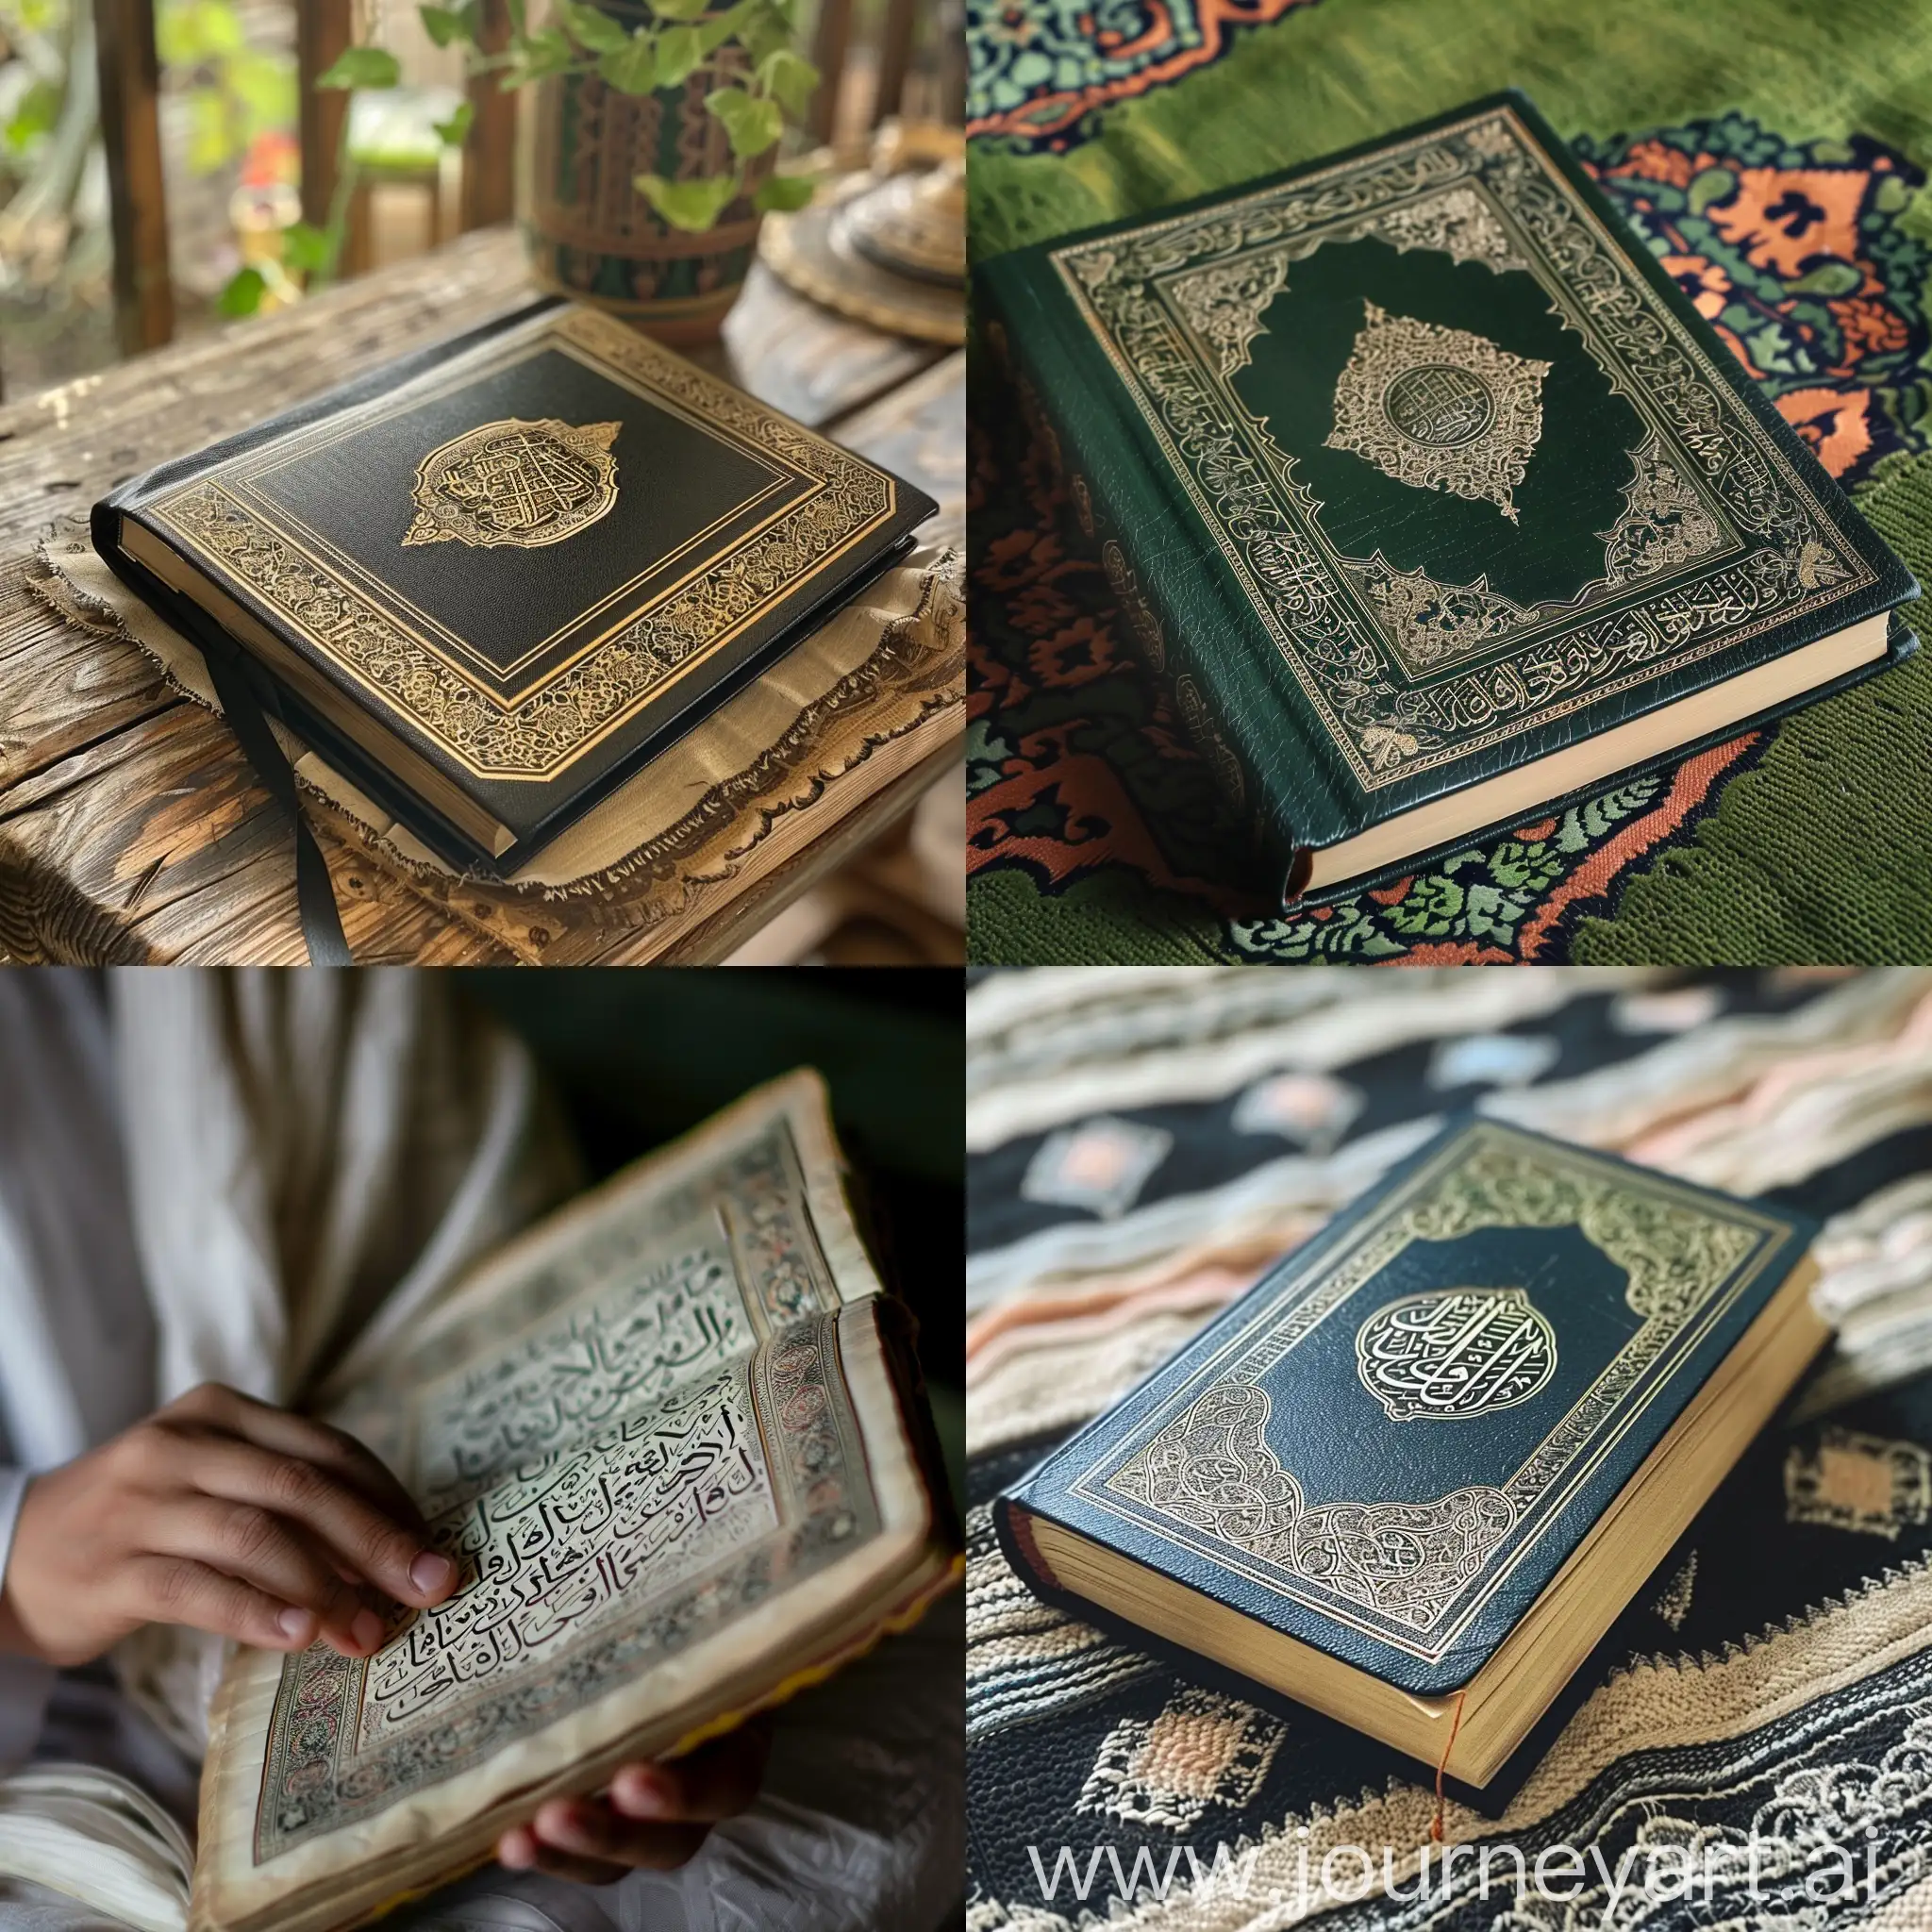 "A close friend and the Quran are the provisions on the path of calling to Allah."